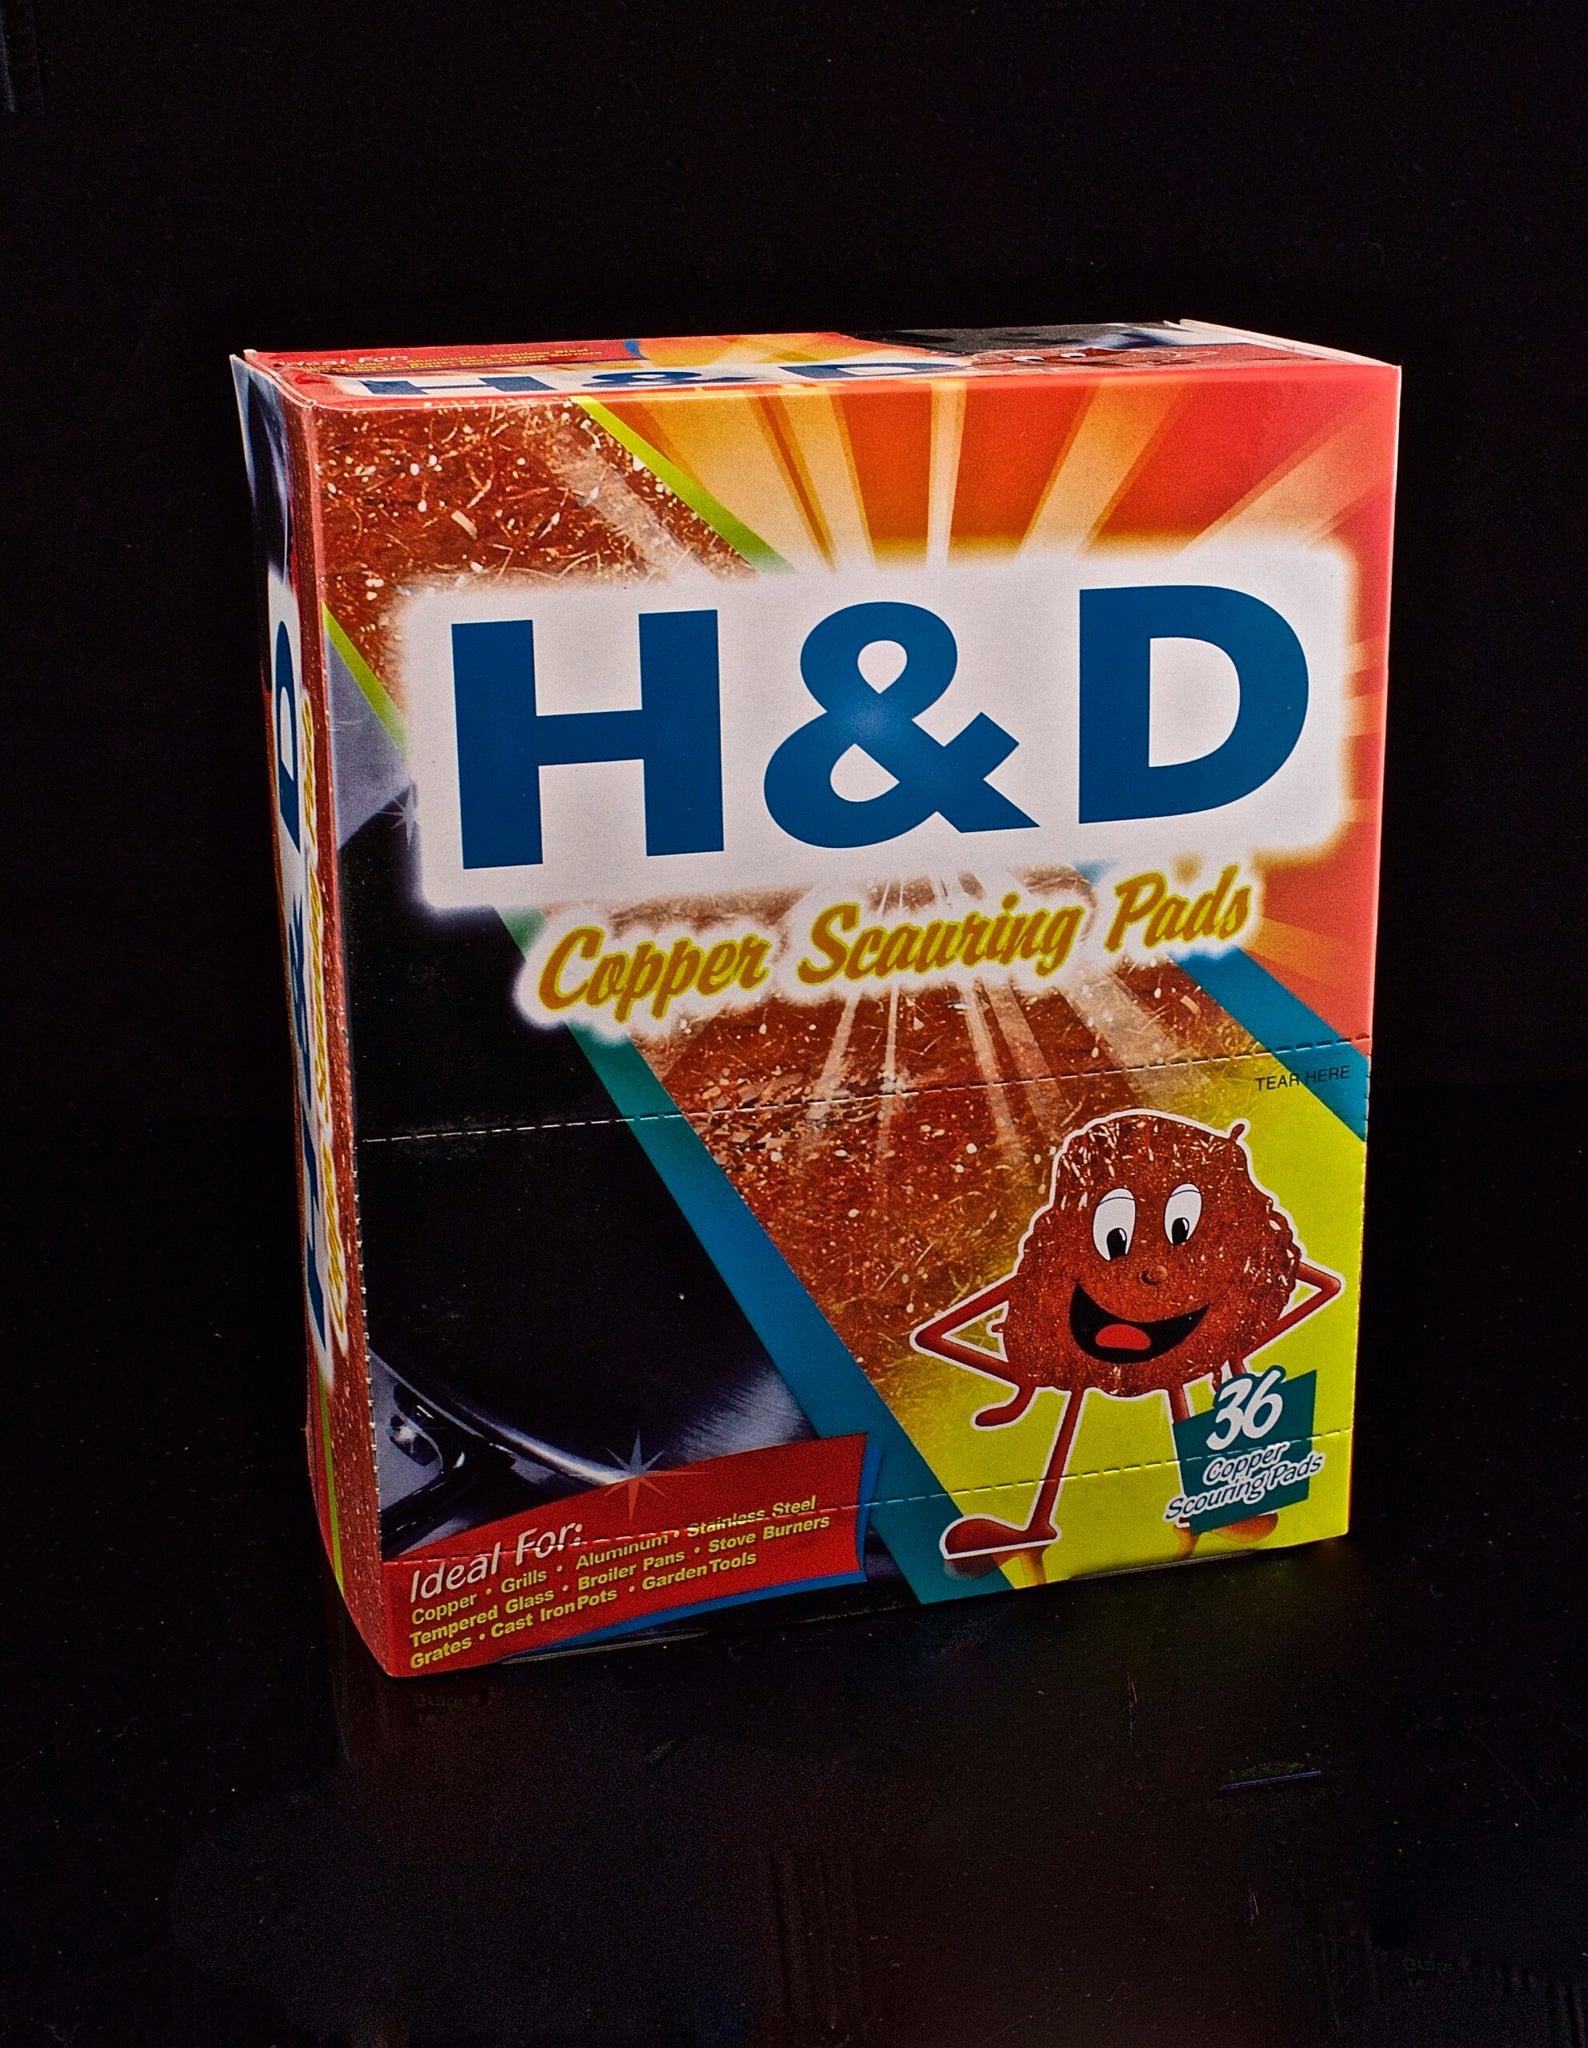 H & D Copper Scarring Pads 36 Copper Scouring Pads -712